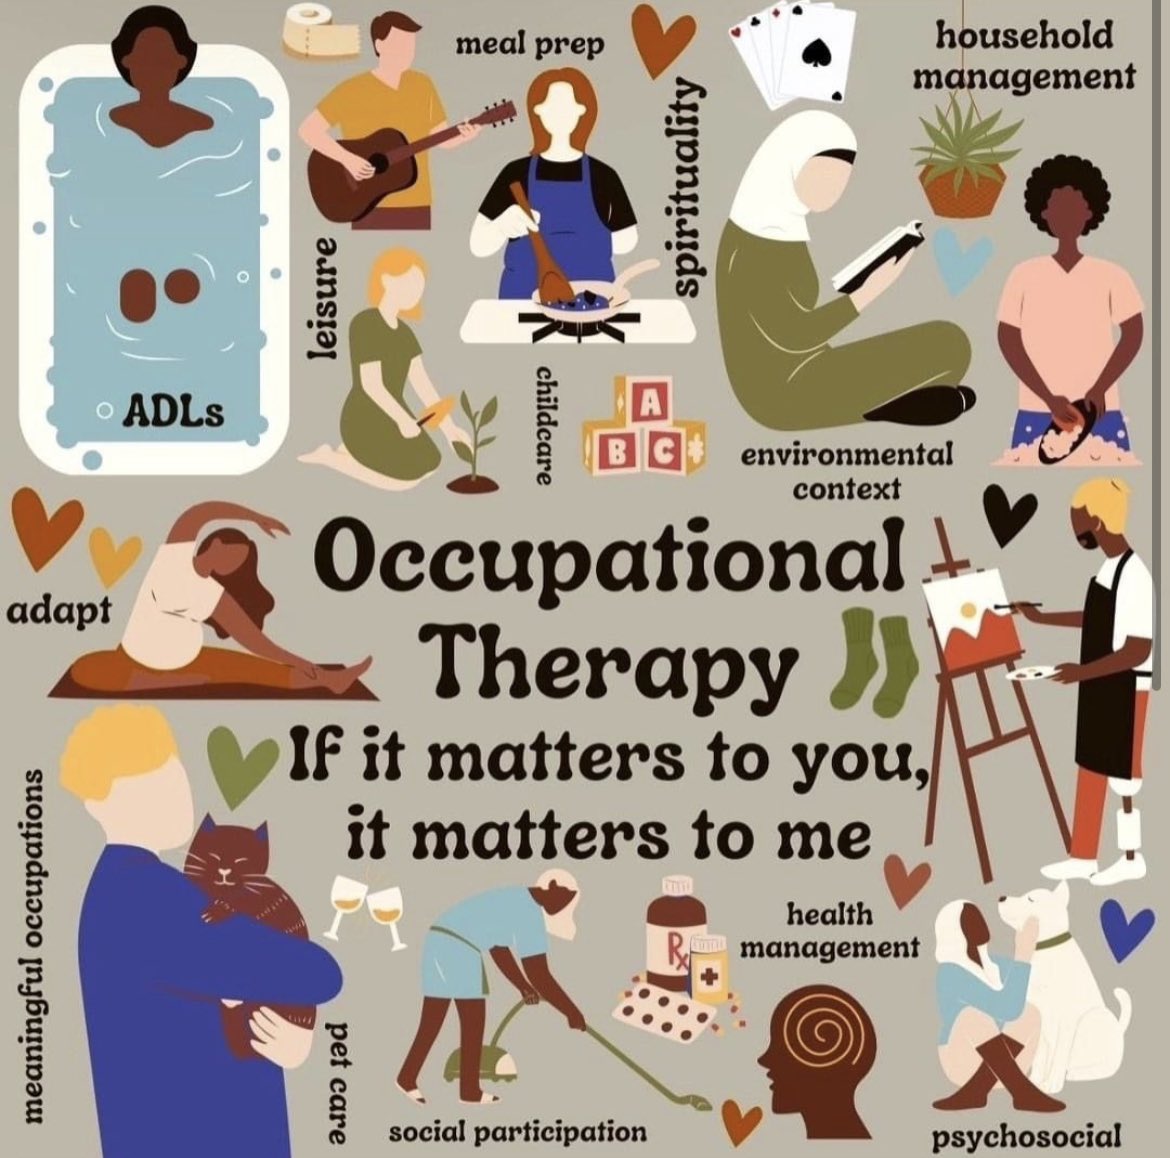 Happy #WorldOTDay! Here's to the many inspirational OTs, OT assistants/recovery workers etc and OT students I've worked with over the years and to the patients I've had the privilege to support - I've learned from all of you 💚 @LSCFT_OTs  #UnityThroughCommunity